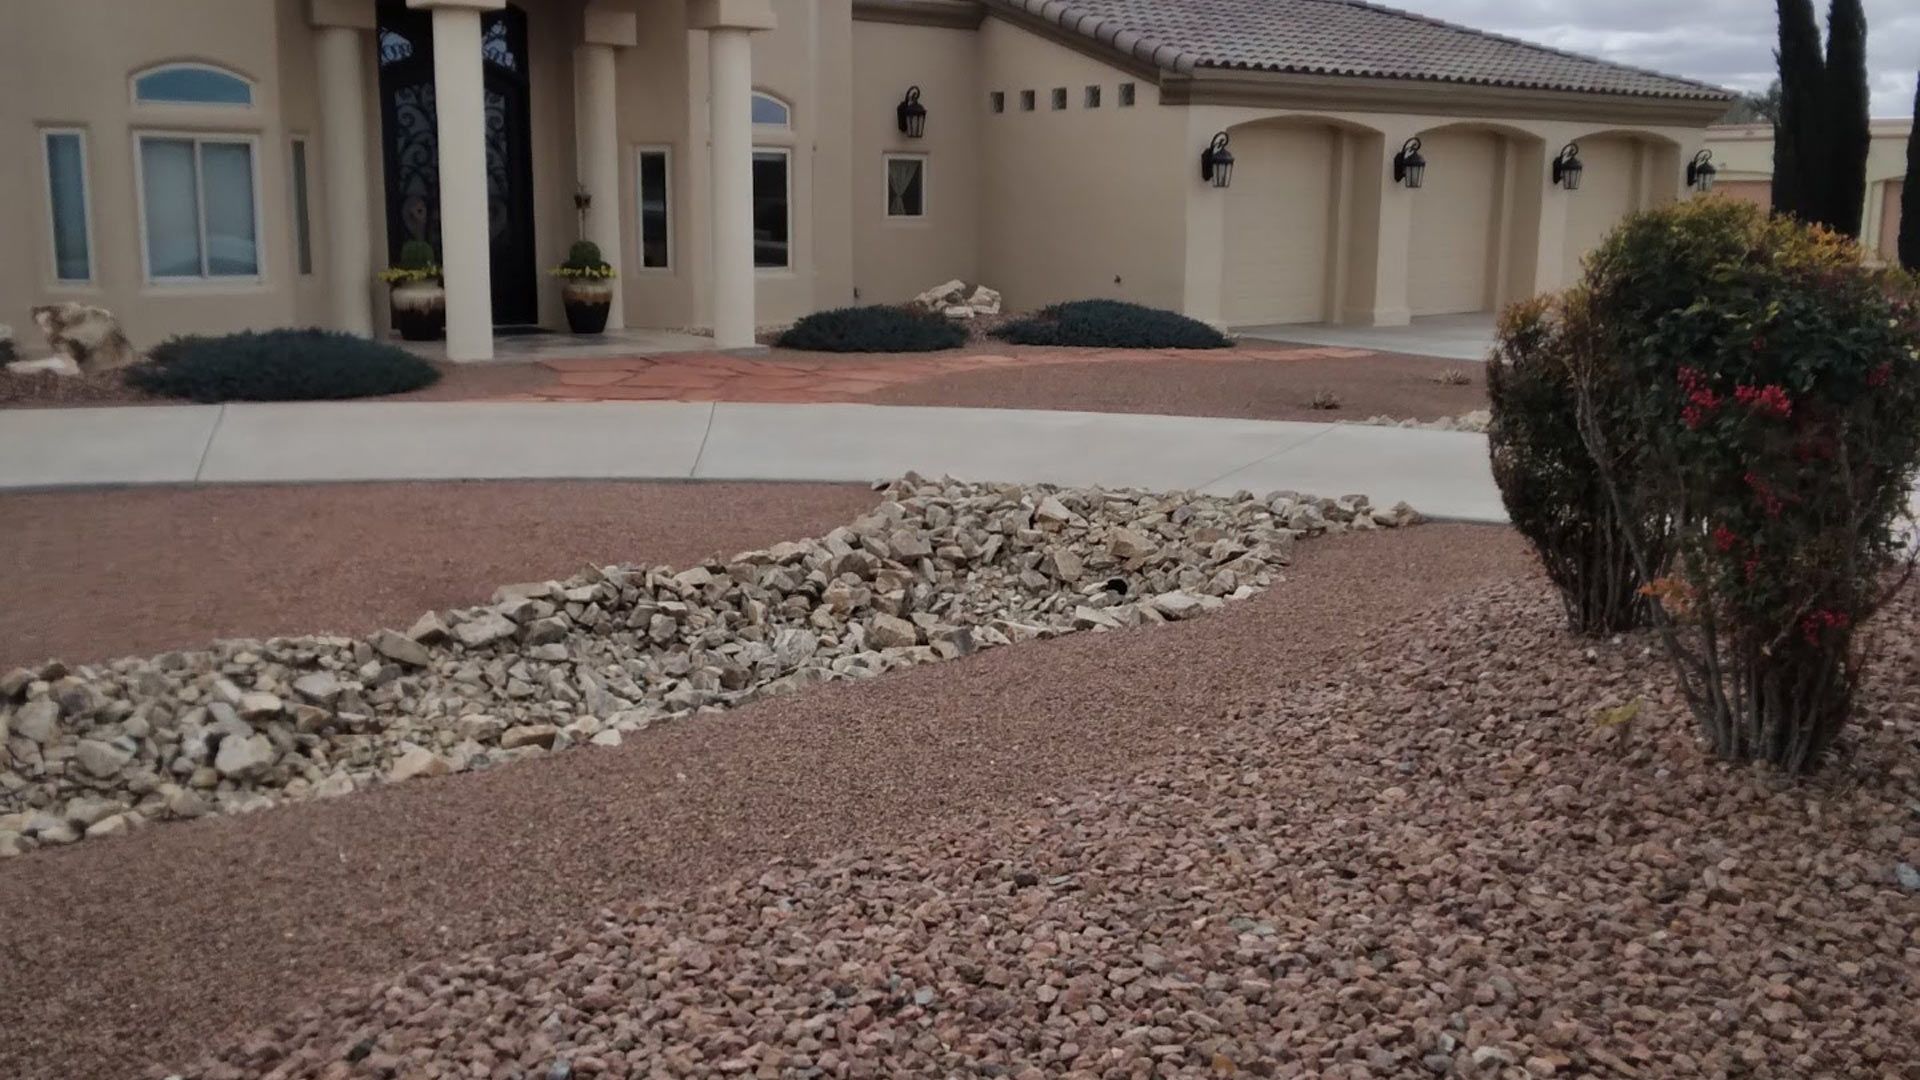 Rock filled landscaping for a property in Las Cruces, TX.